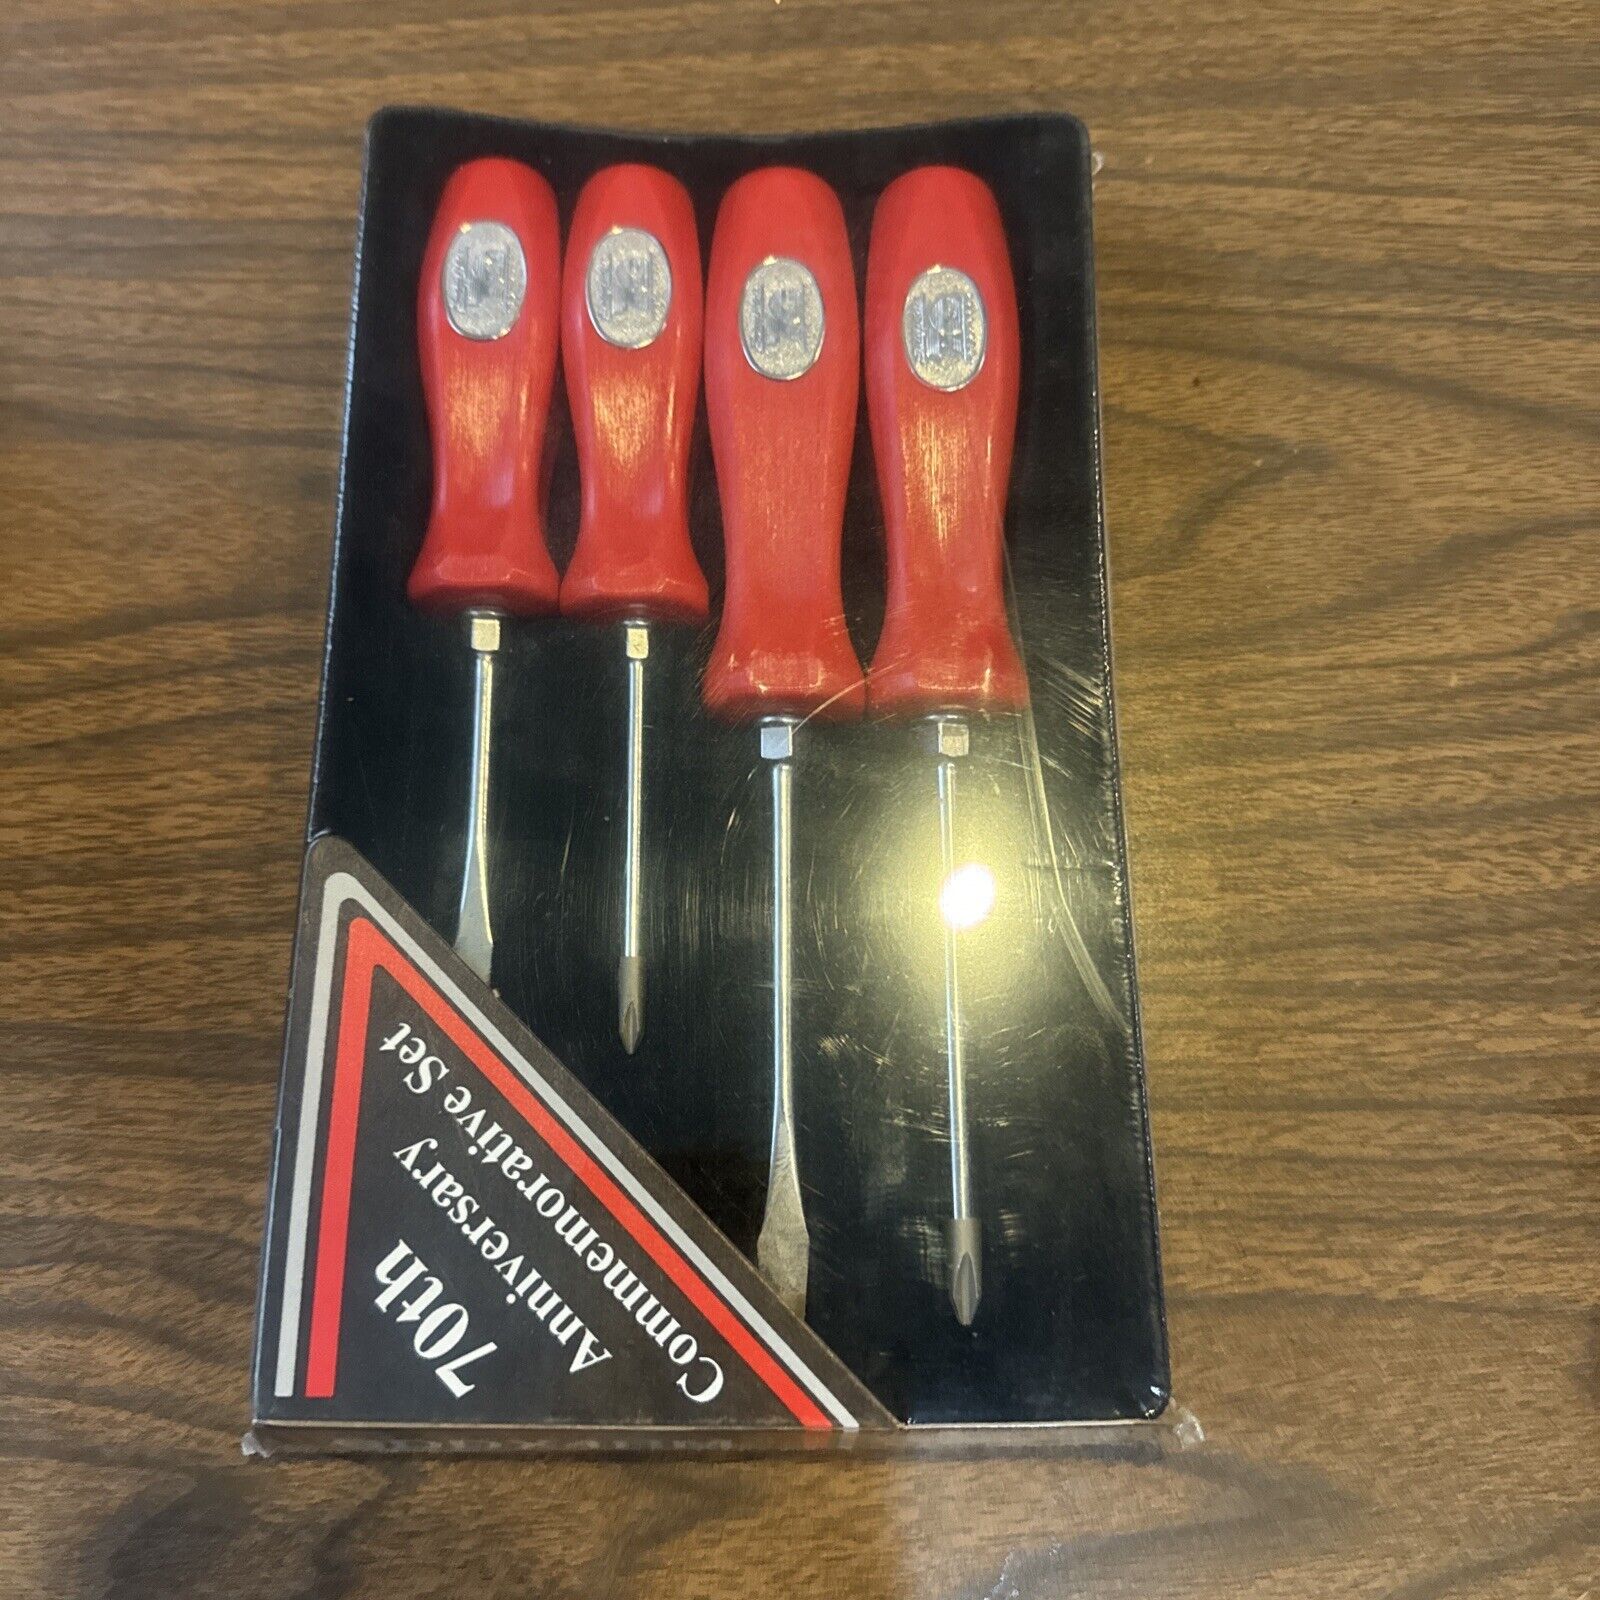 Snap On Tools 70th Anniversary Commemorative 4 Piece Screwdriver Set Sealed